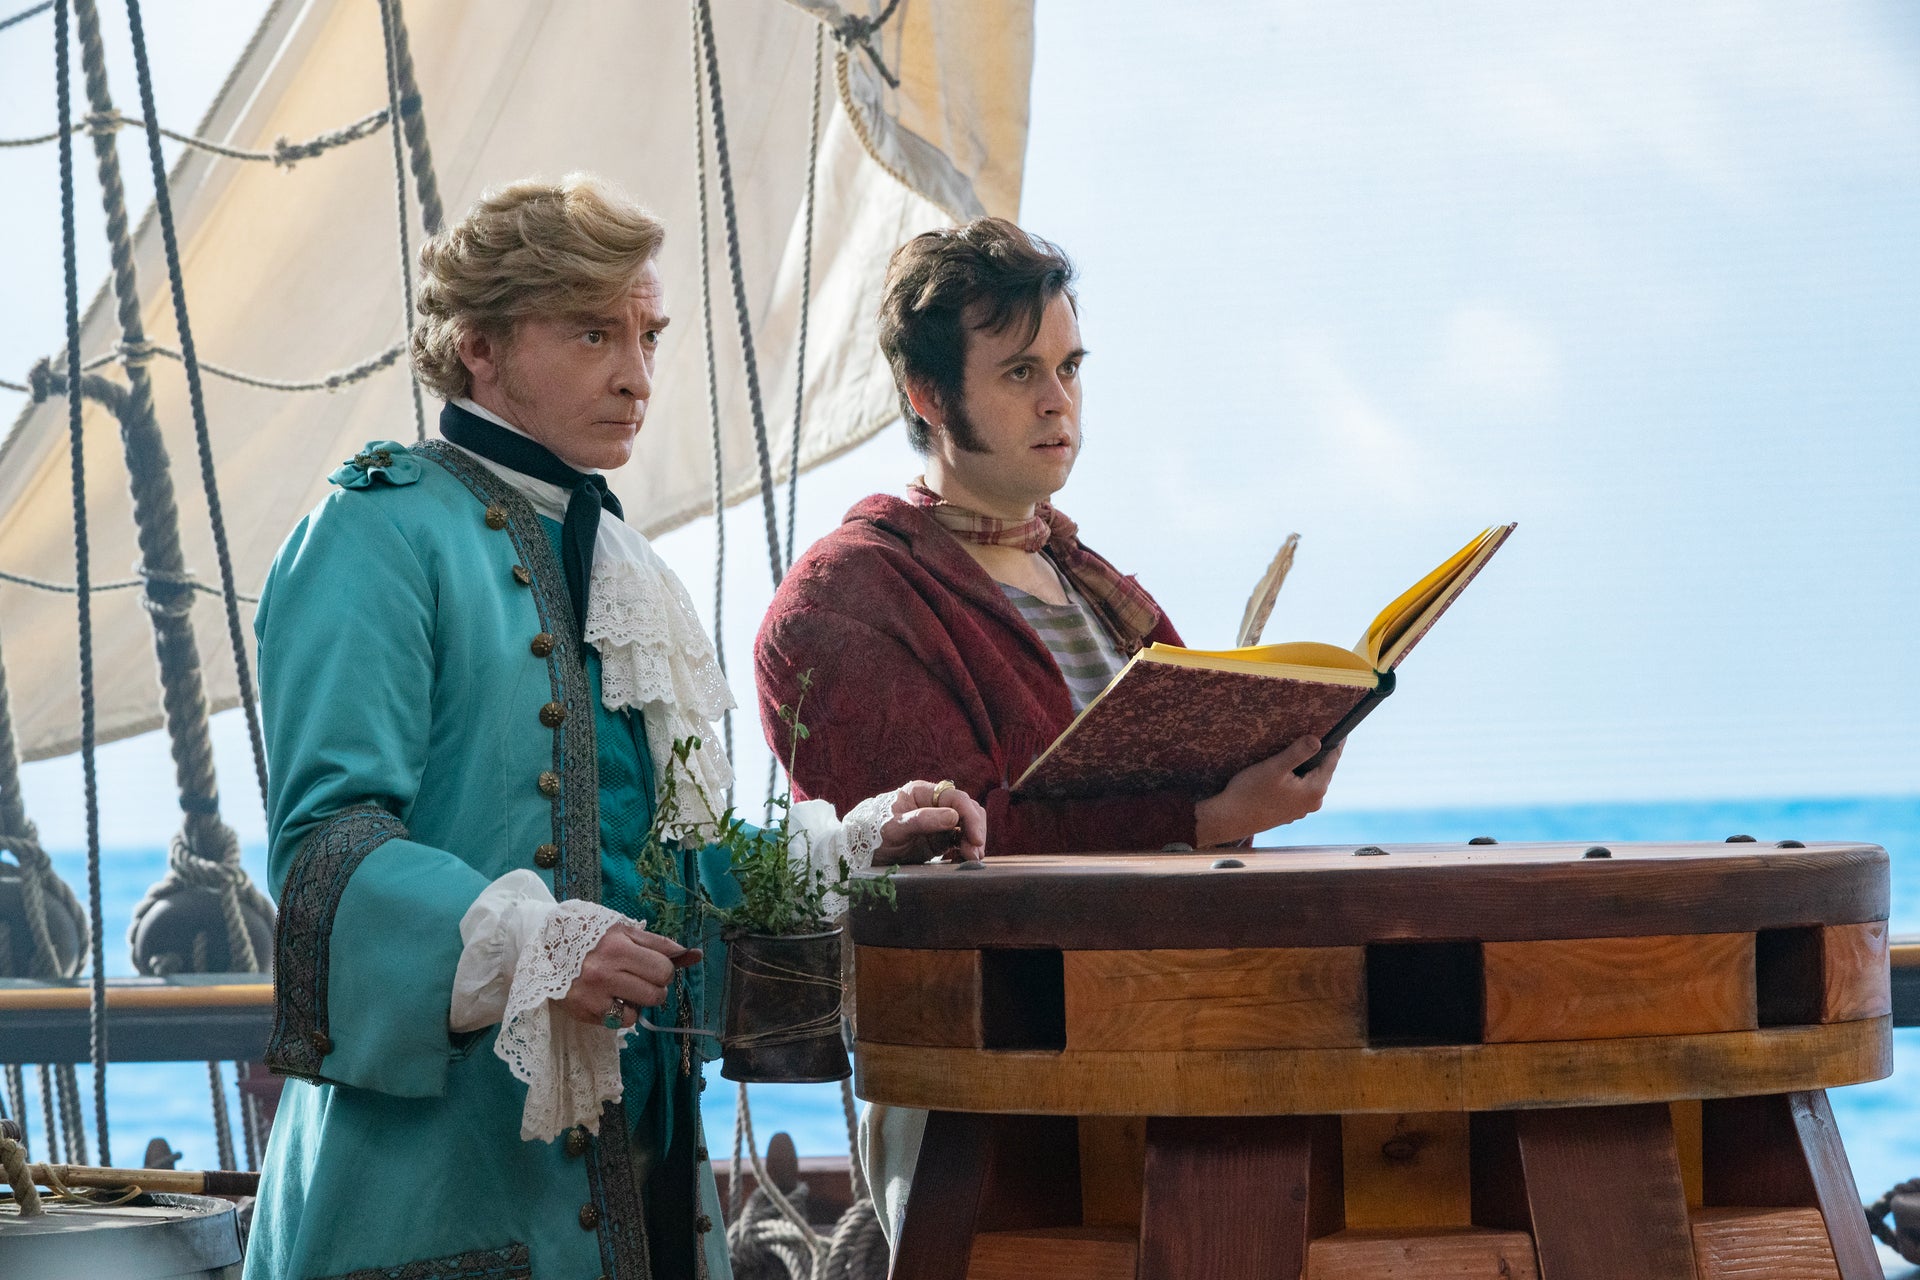 Captain Stede Bonnet (Rhys Darby) and crew member Lucius (Nathan Foad) aboard the Revenge. (Photo: Aaron Epstein/HBO Max)